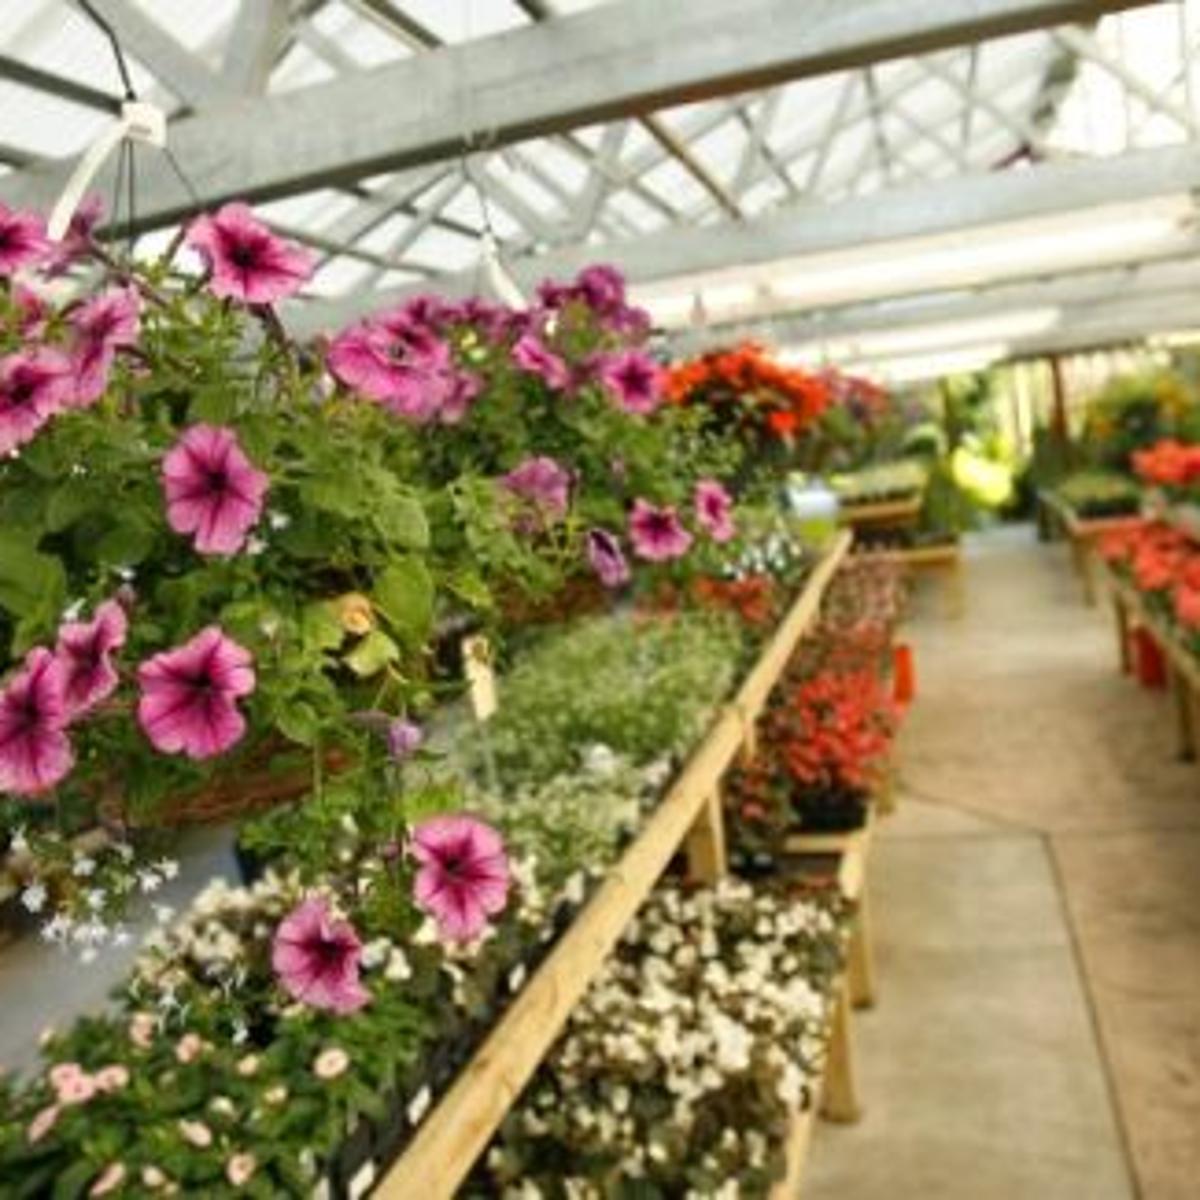 5 To Find Nurseries That Can Help You Find Your Green Thumb